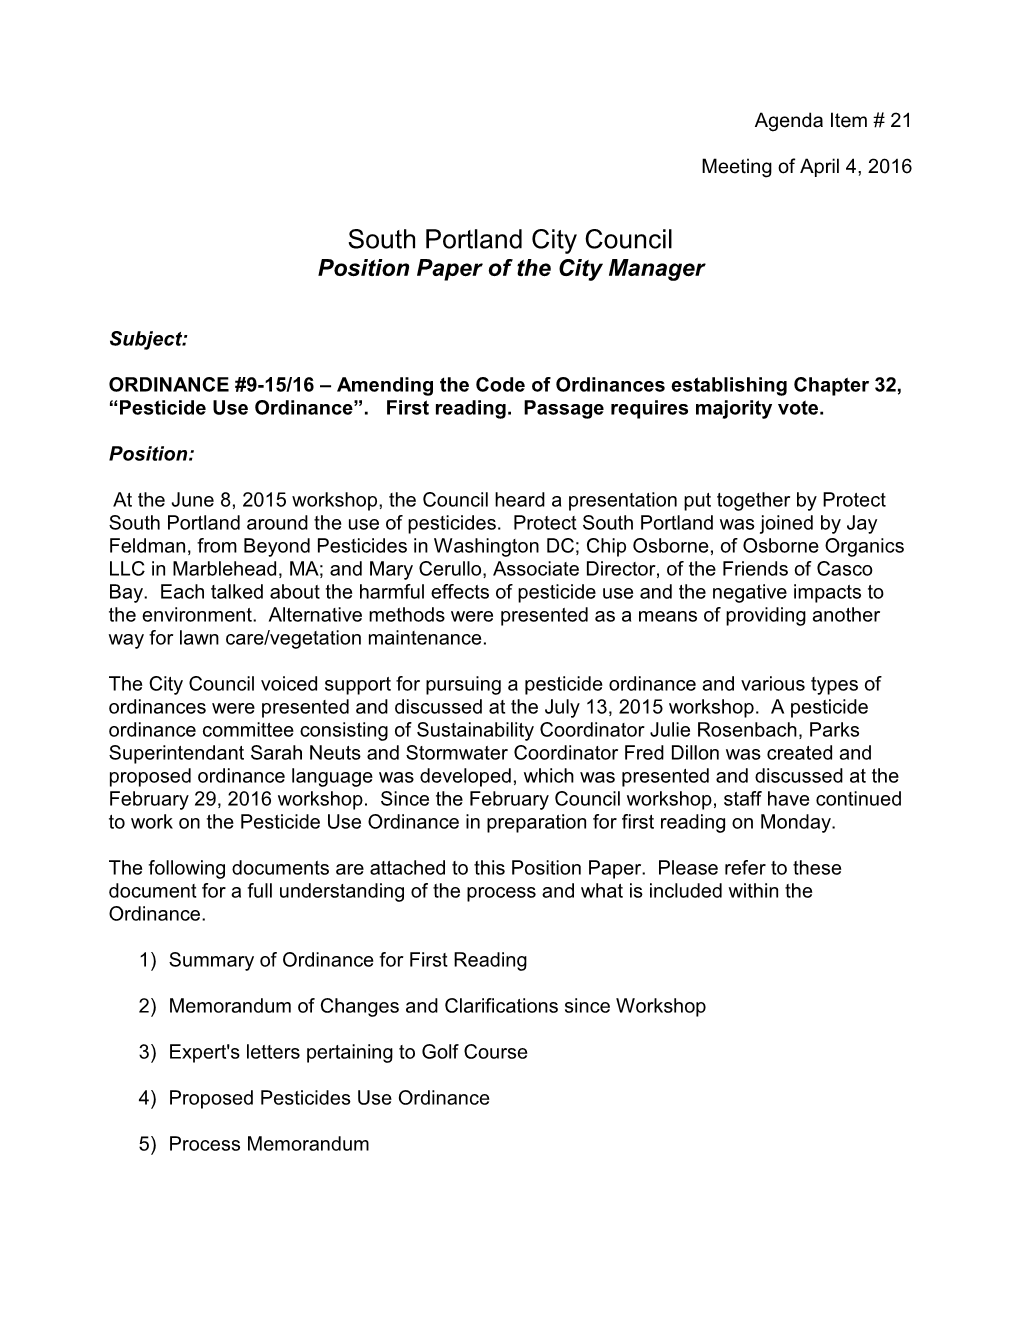 South Portland City Council Position Paper of the City Manager